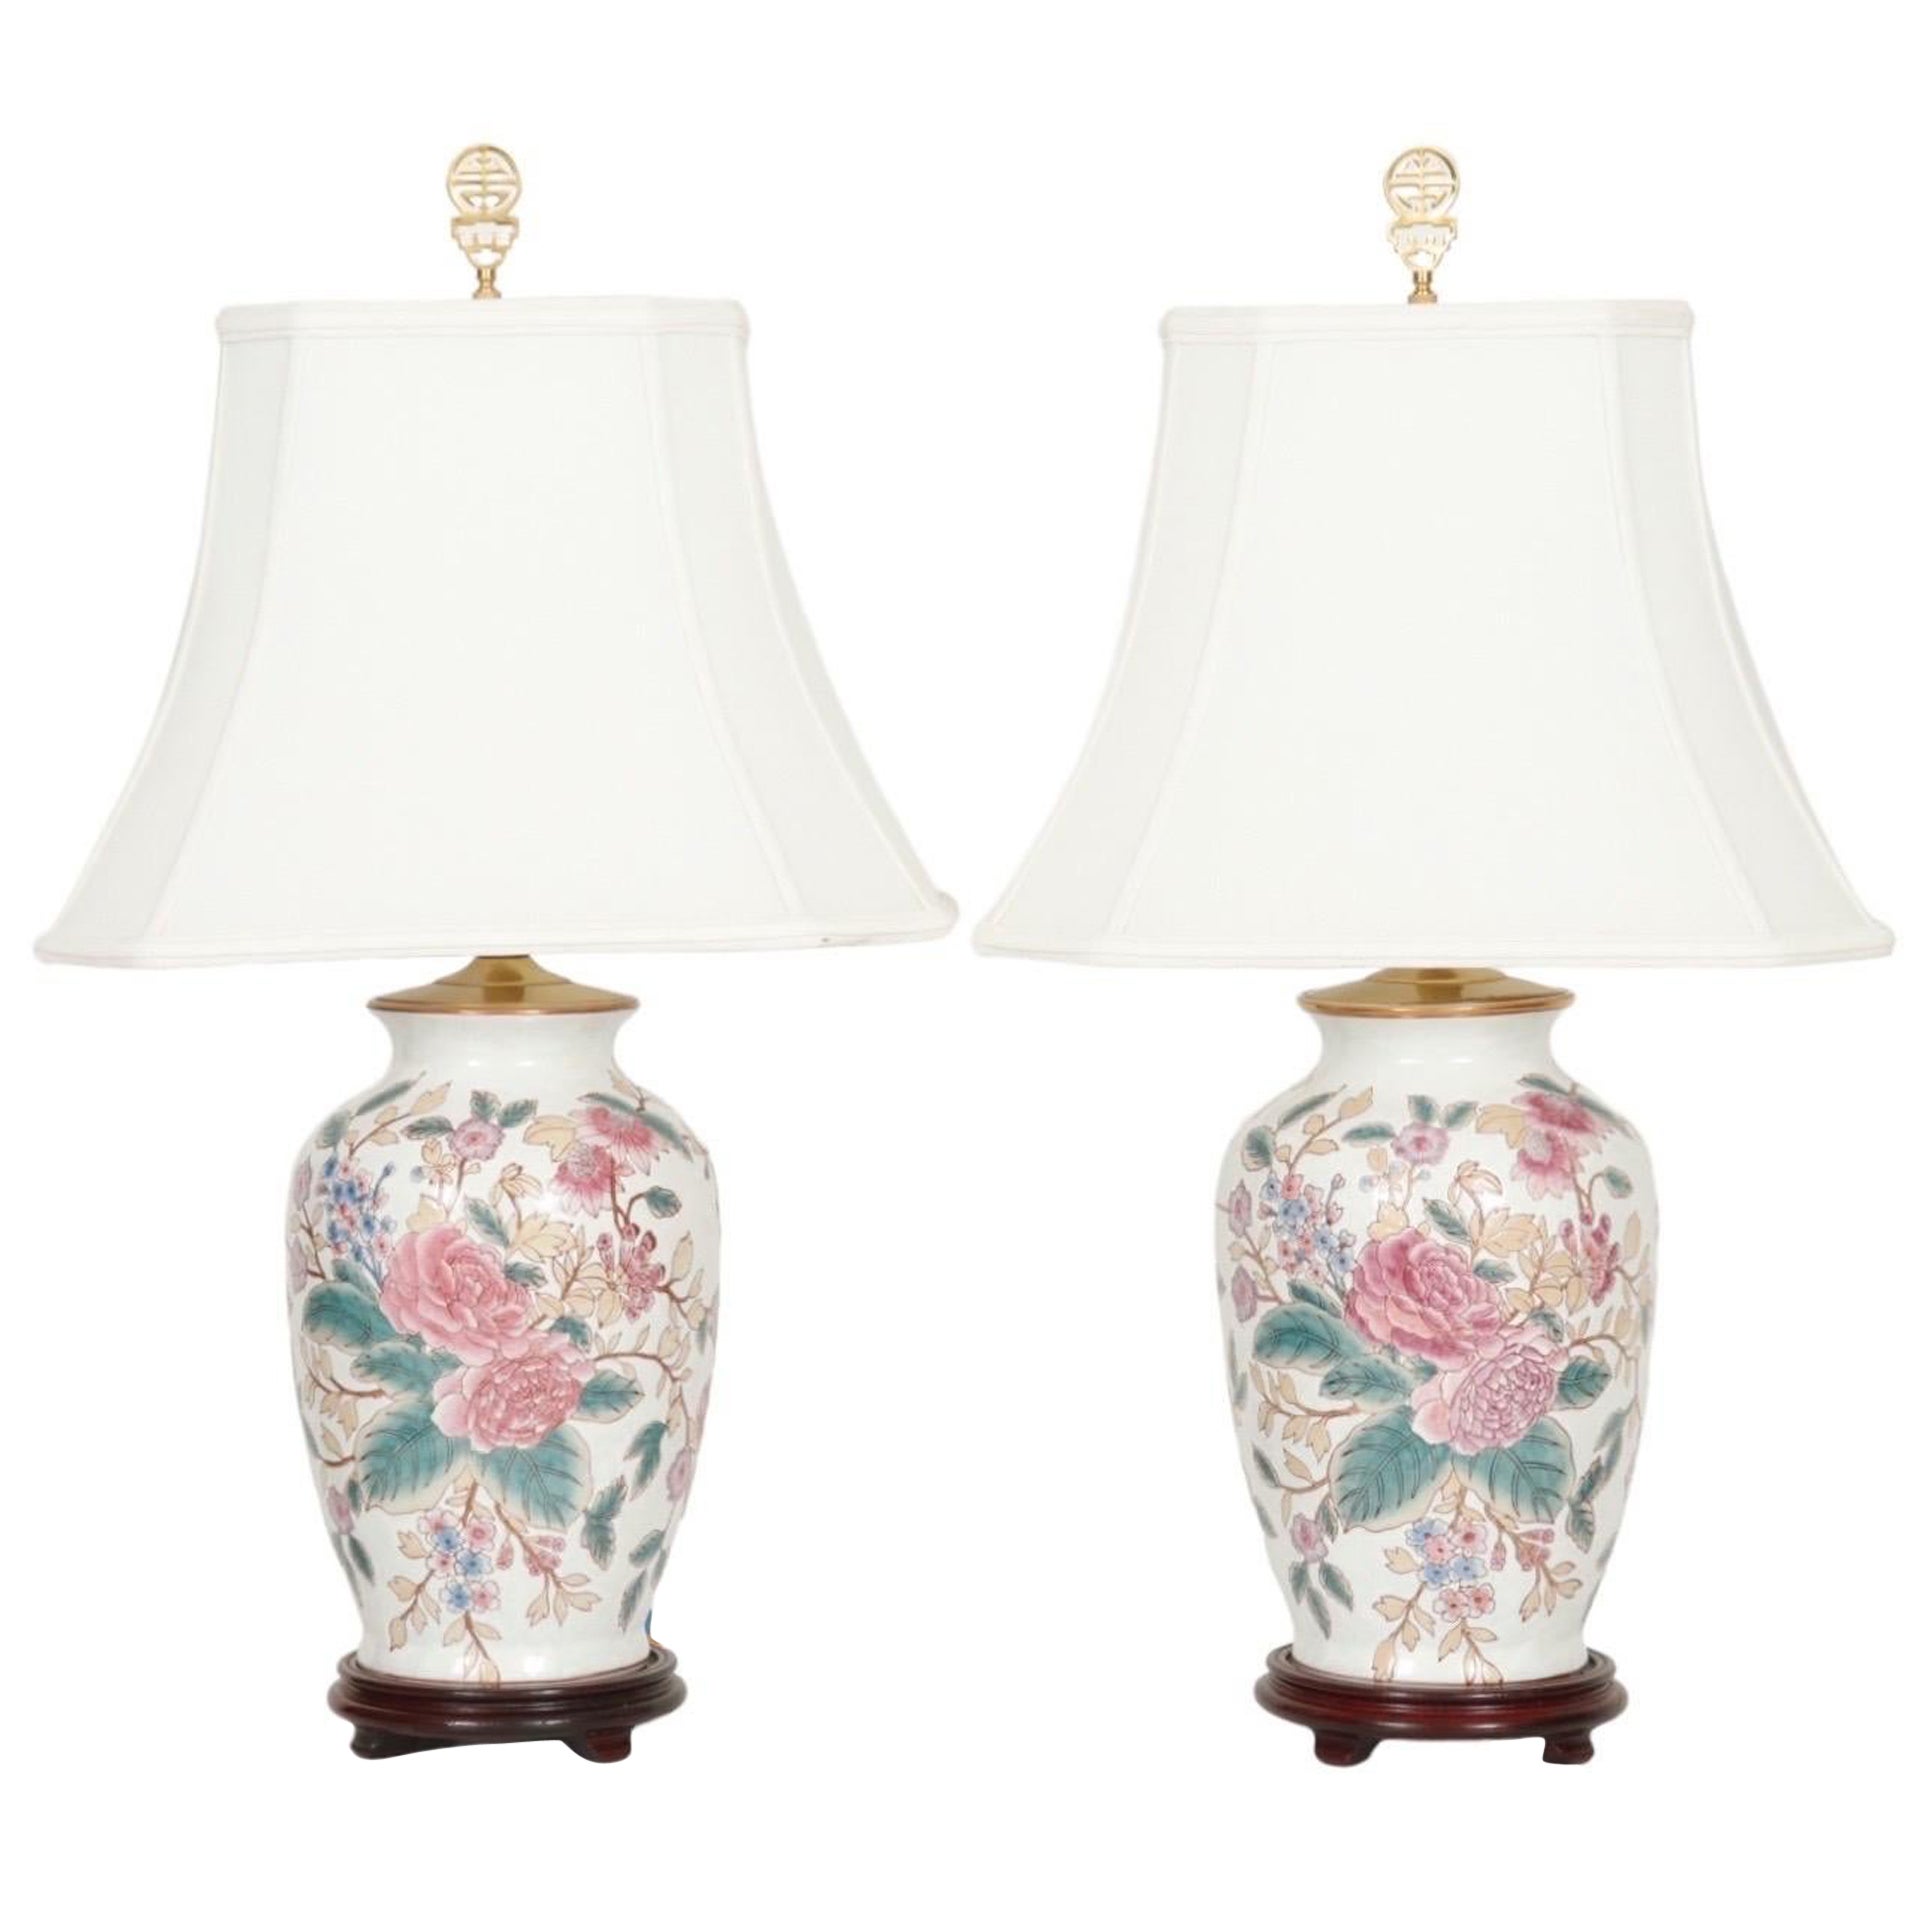 Ming Style Floral Ceramic Table Lamps, a Pair For Sale